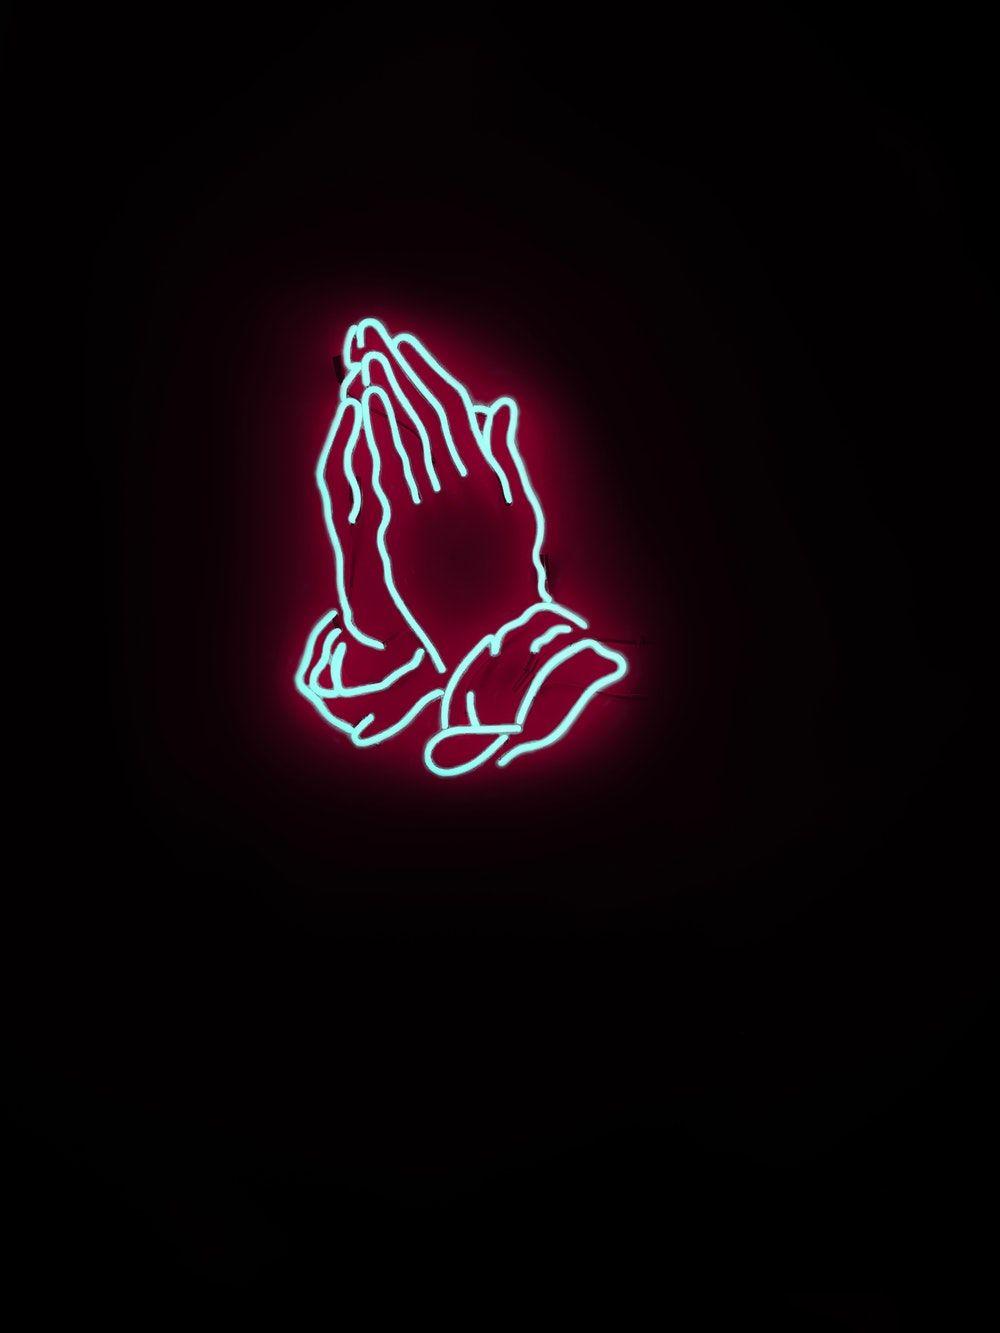 Pray Picture. Download Free Image & Stock